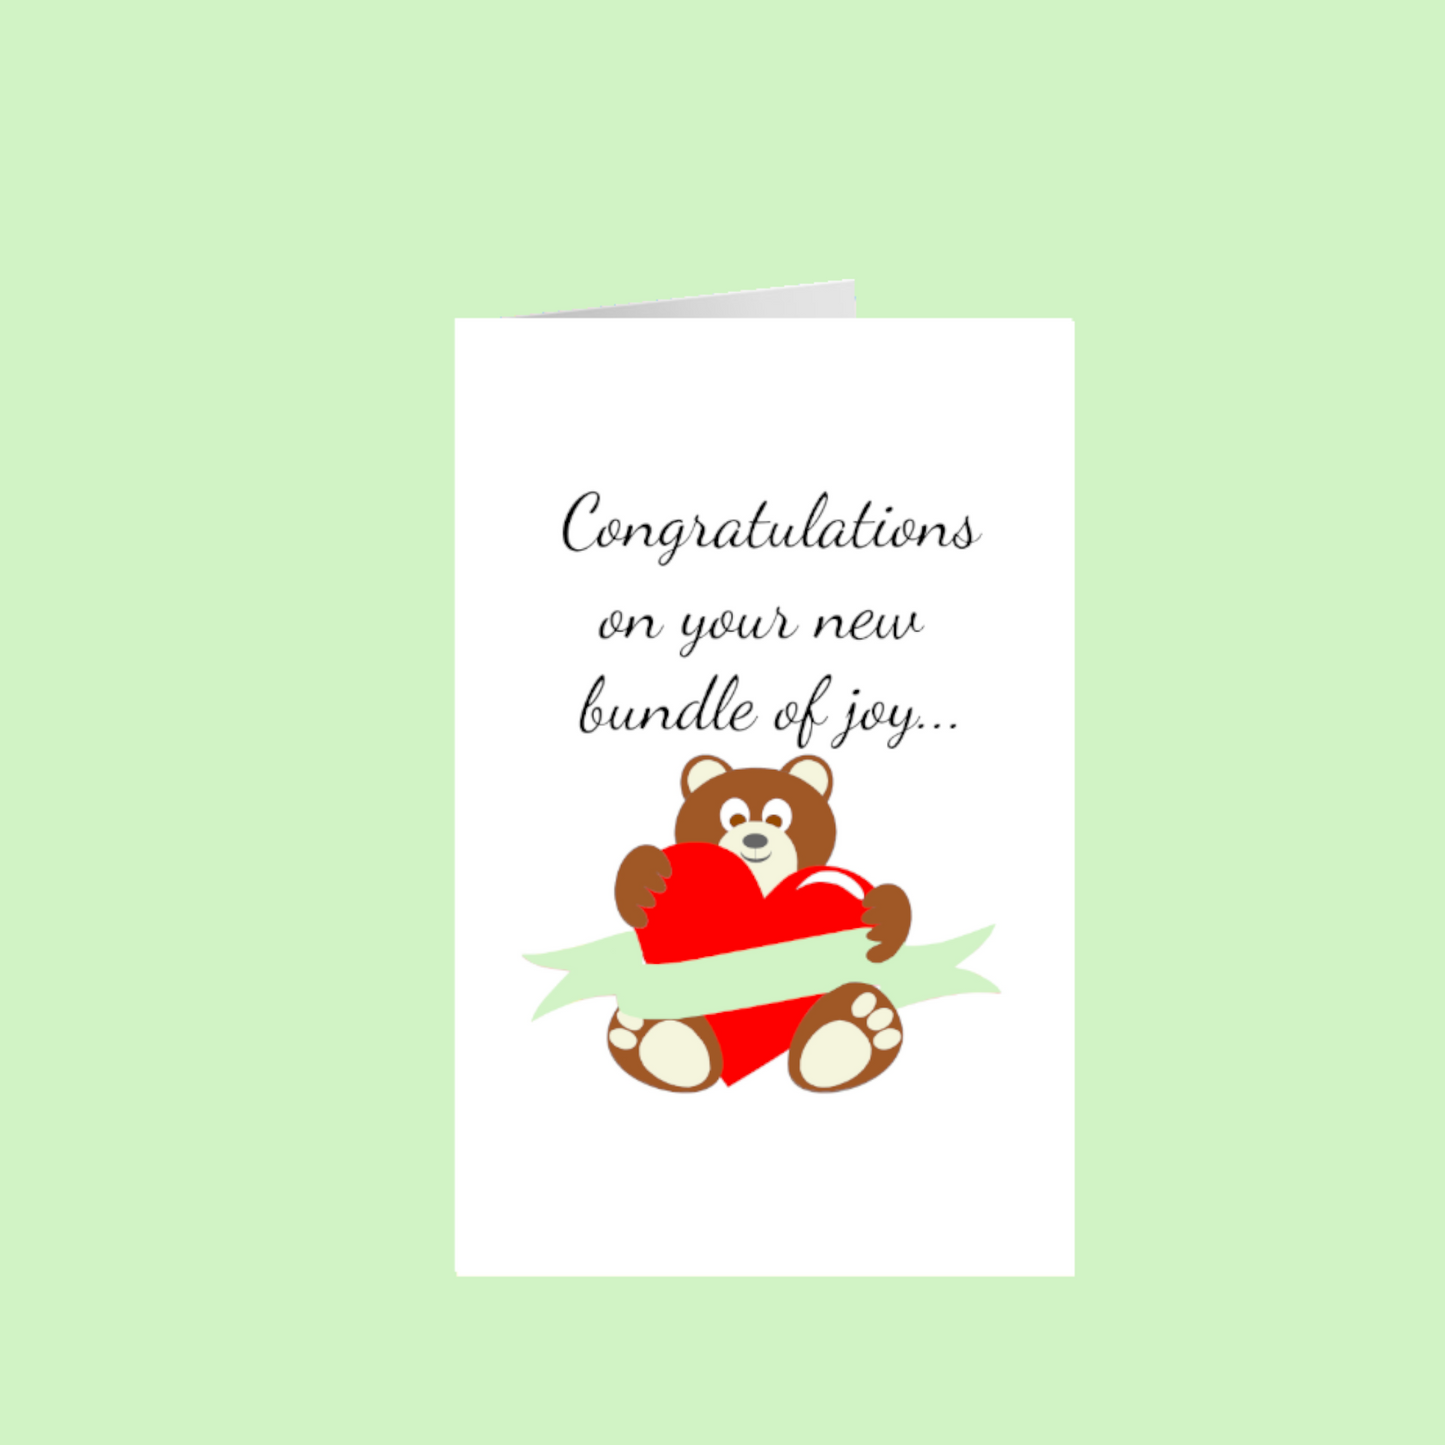 Congratulations on new 5.5x8.5 Greeting Card - Green